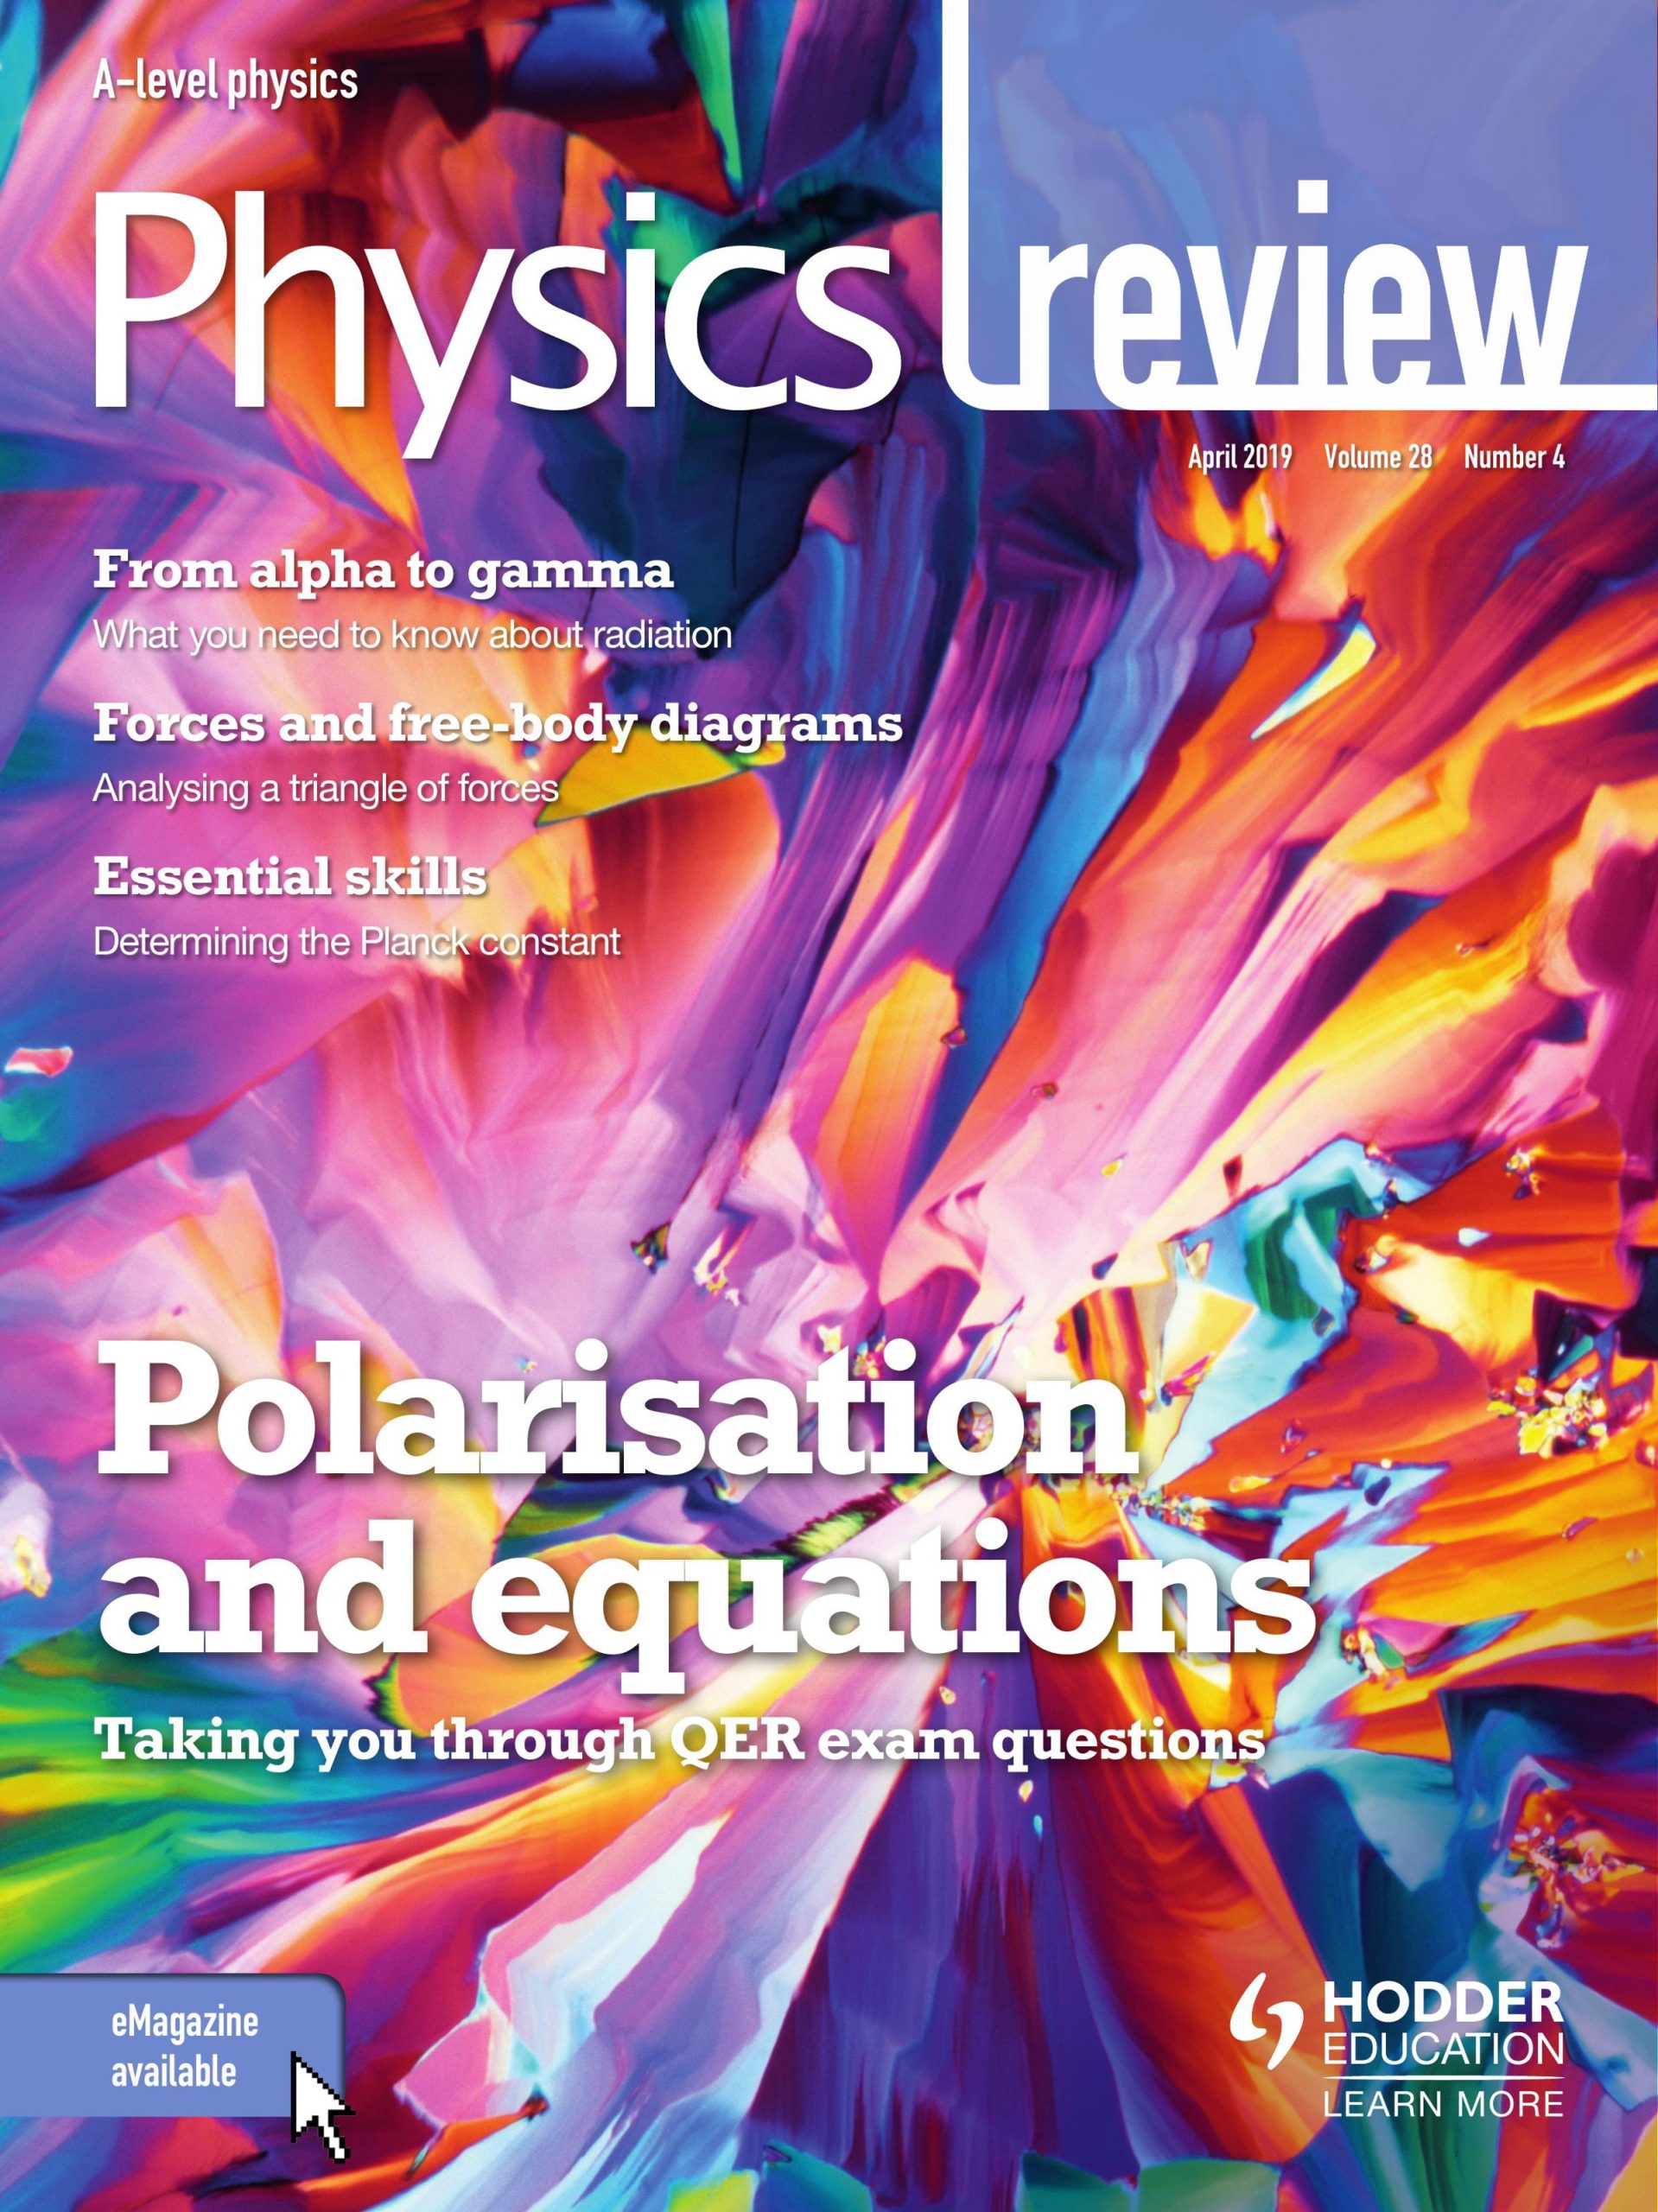 physical review physics education research 1